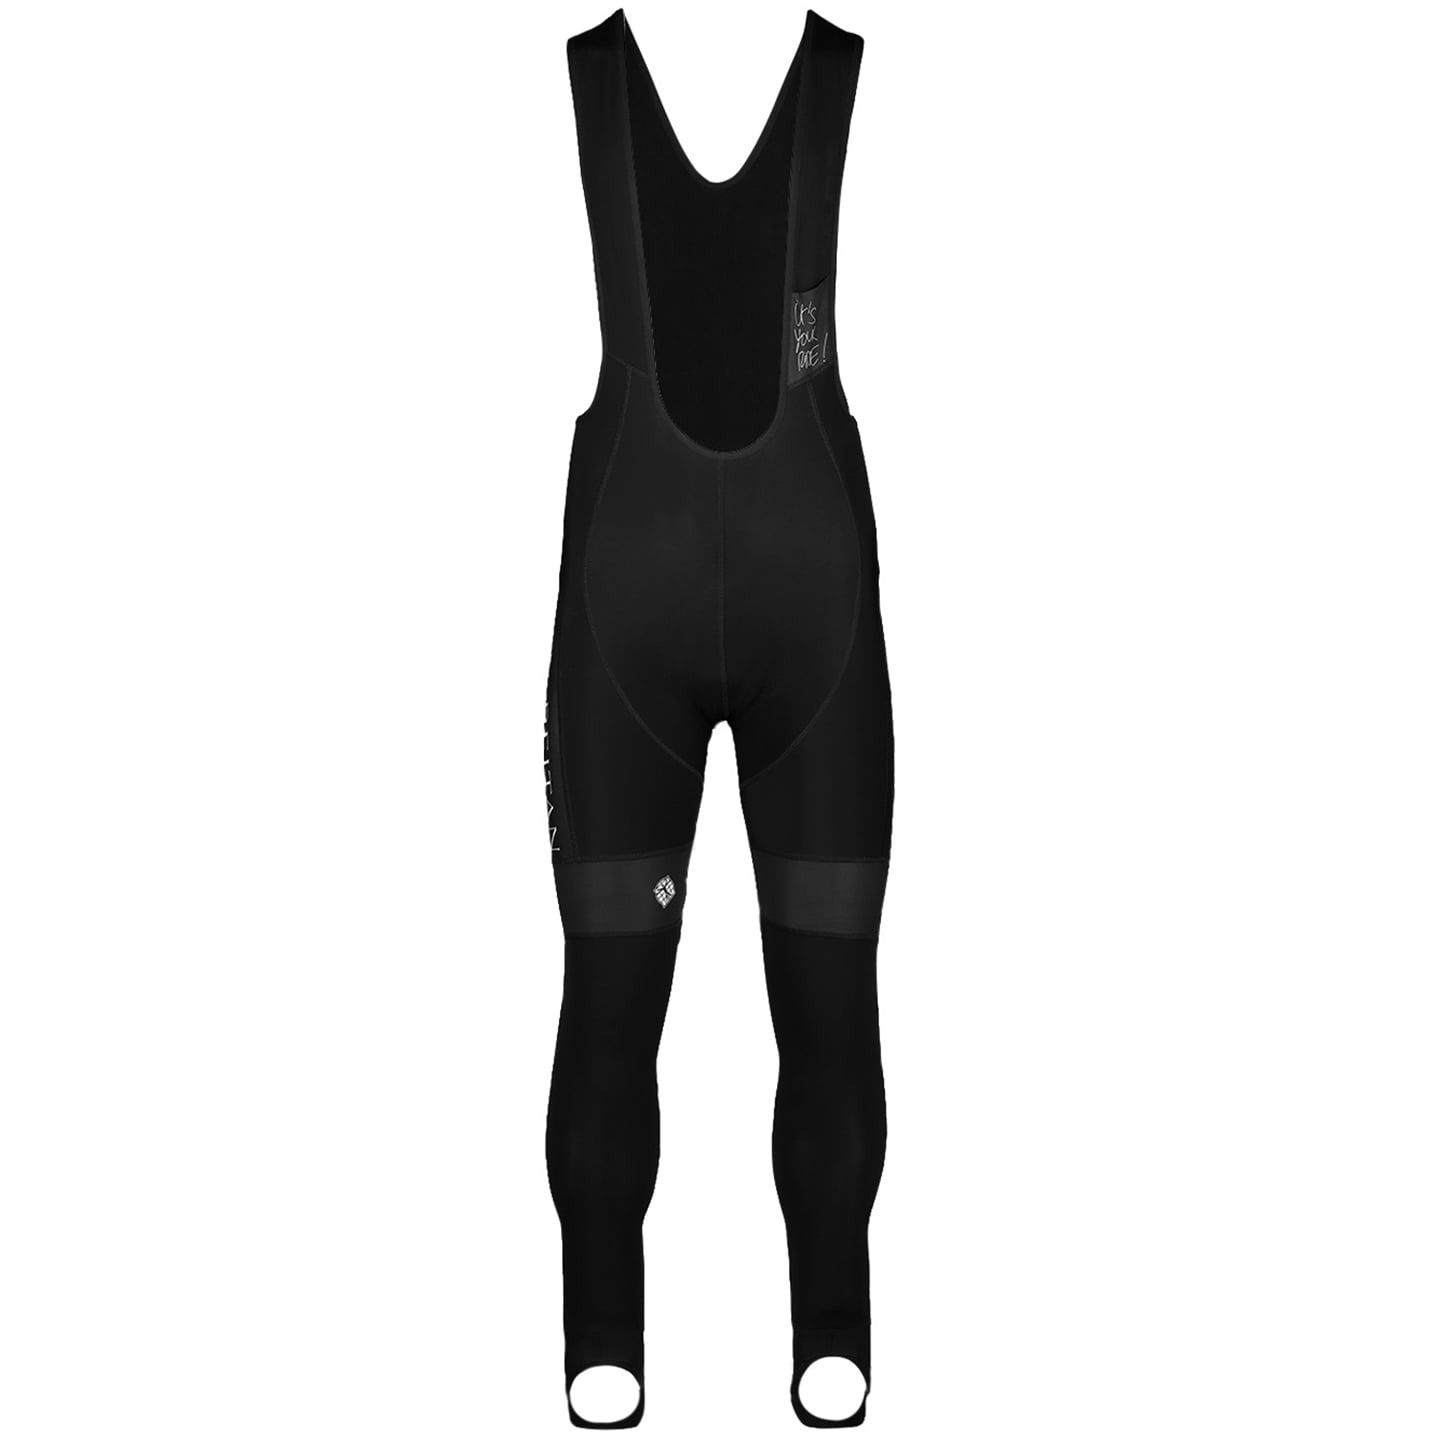 Uno-X Icon Tempest TdF 2023 Bib Tights, for men, size 2XL, Cycle trousers, Cycle gear